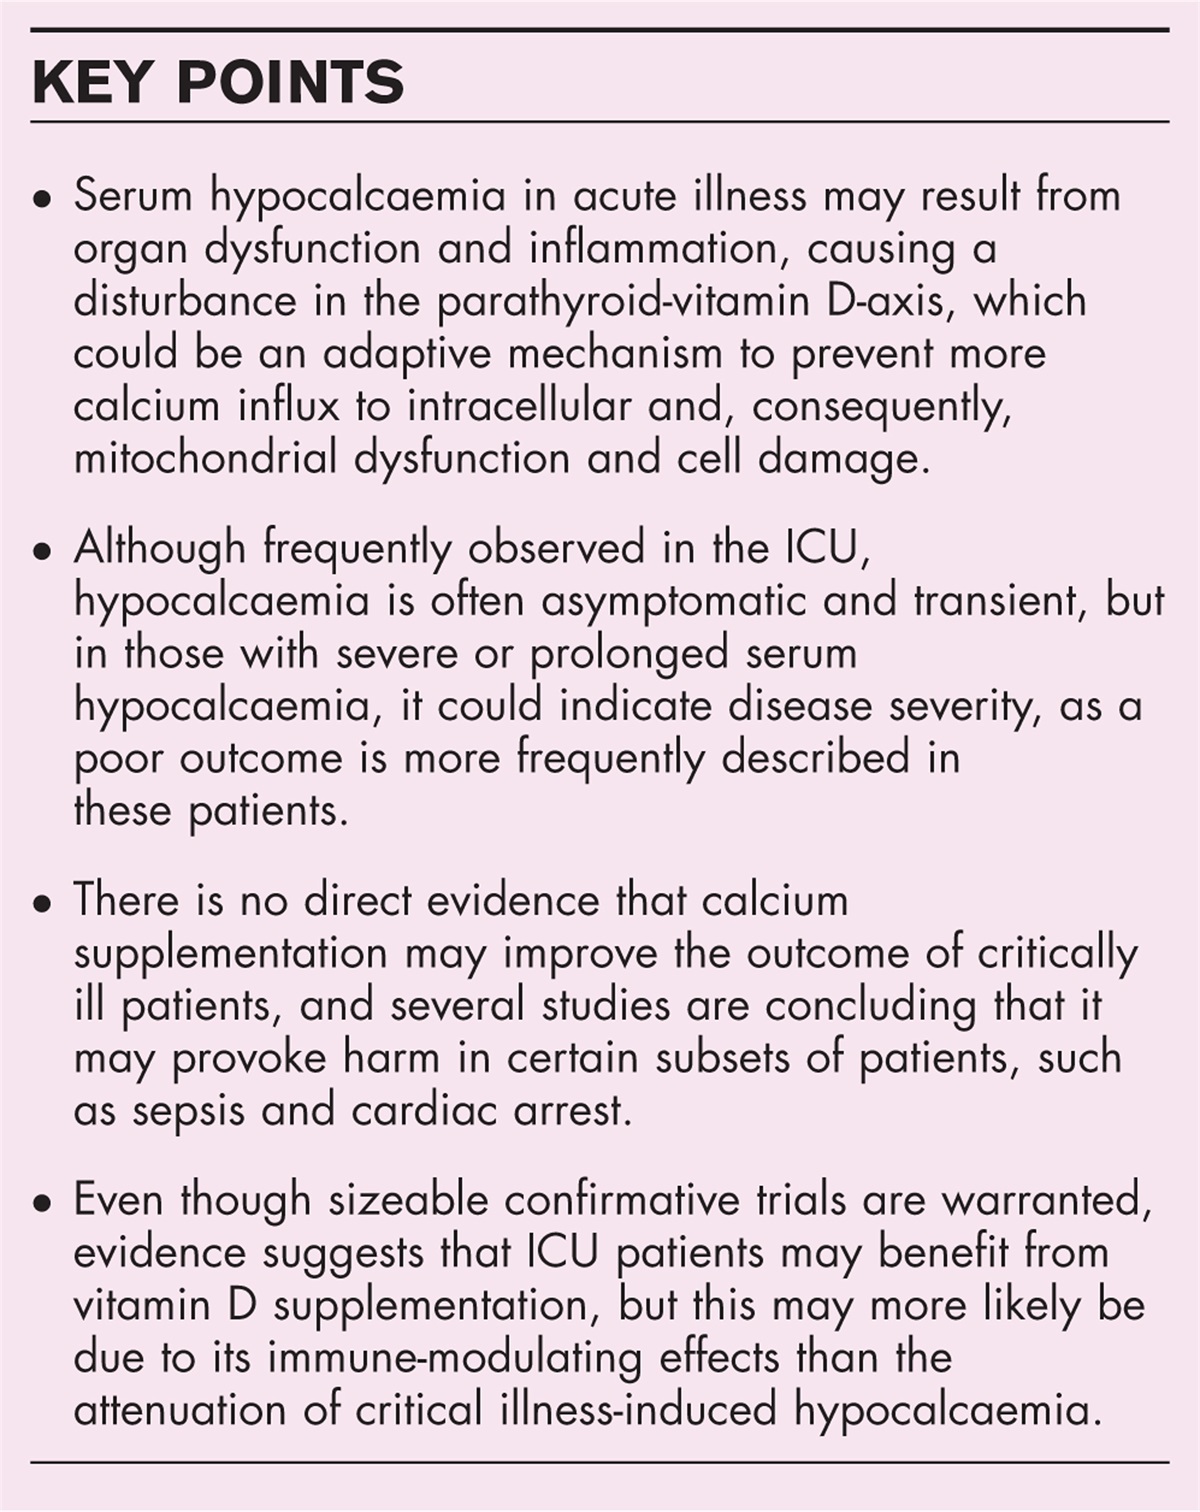 Management of hypocalcaemia in the critically ill